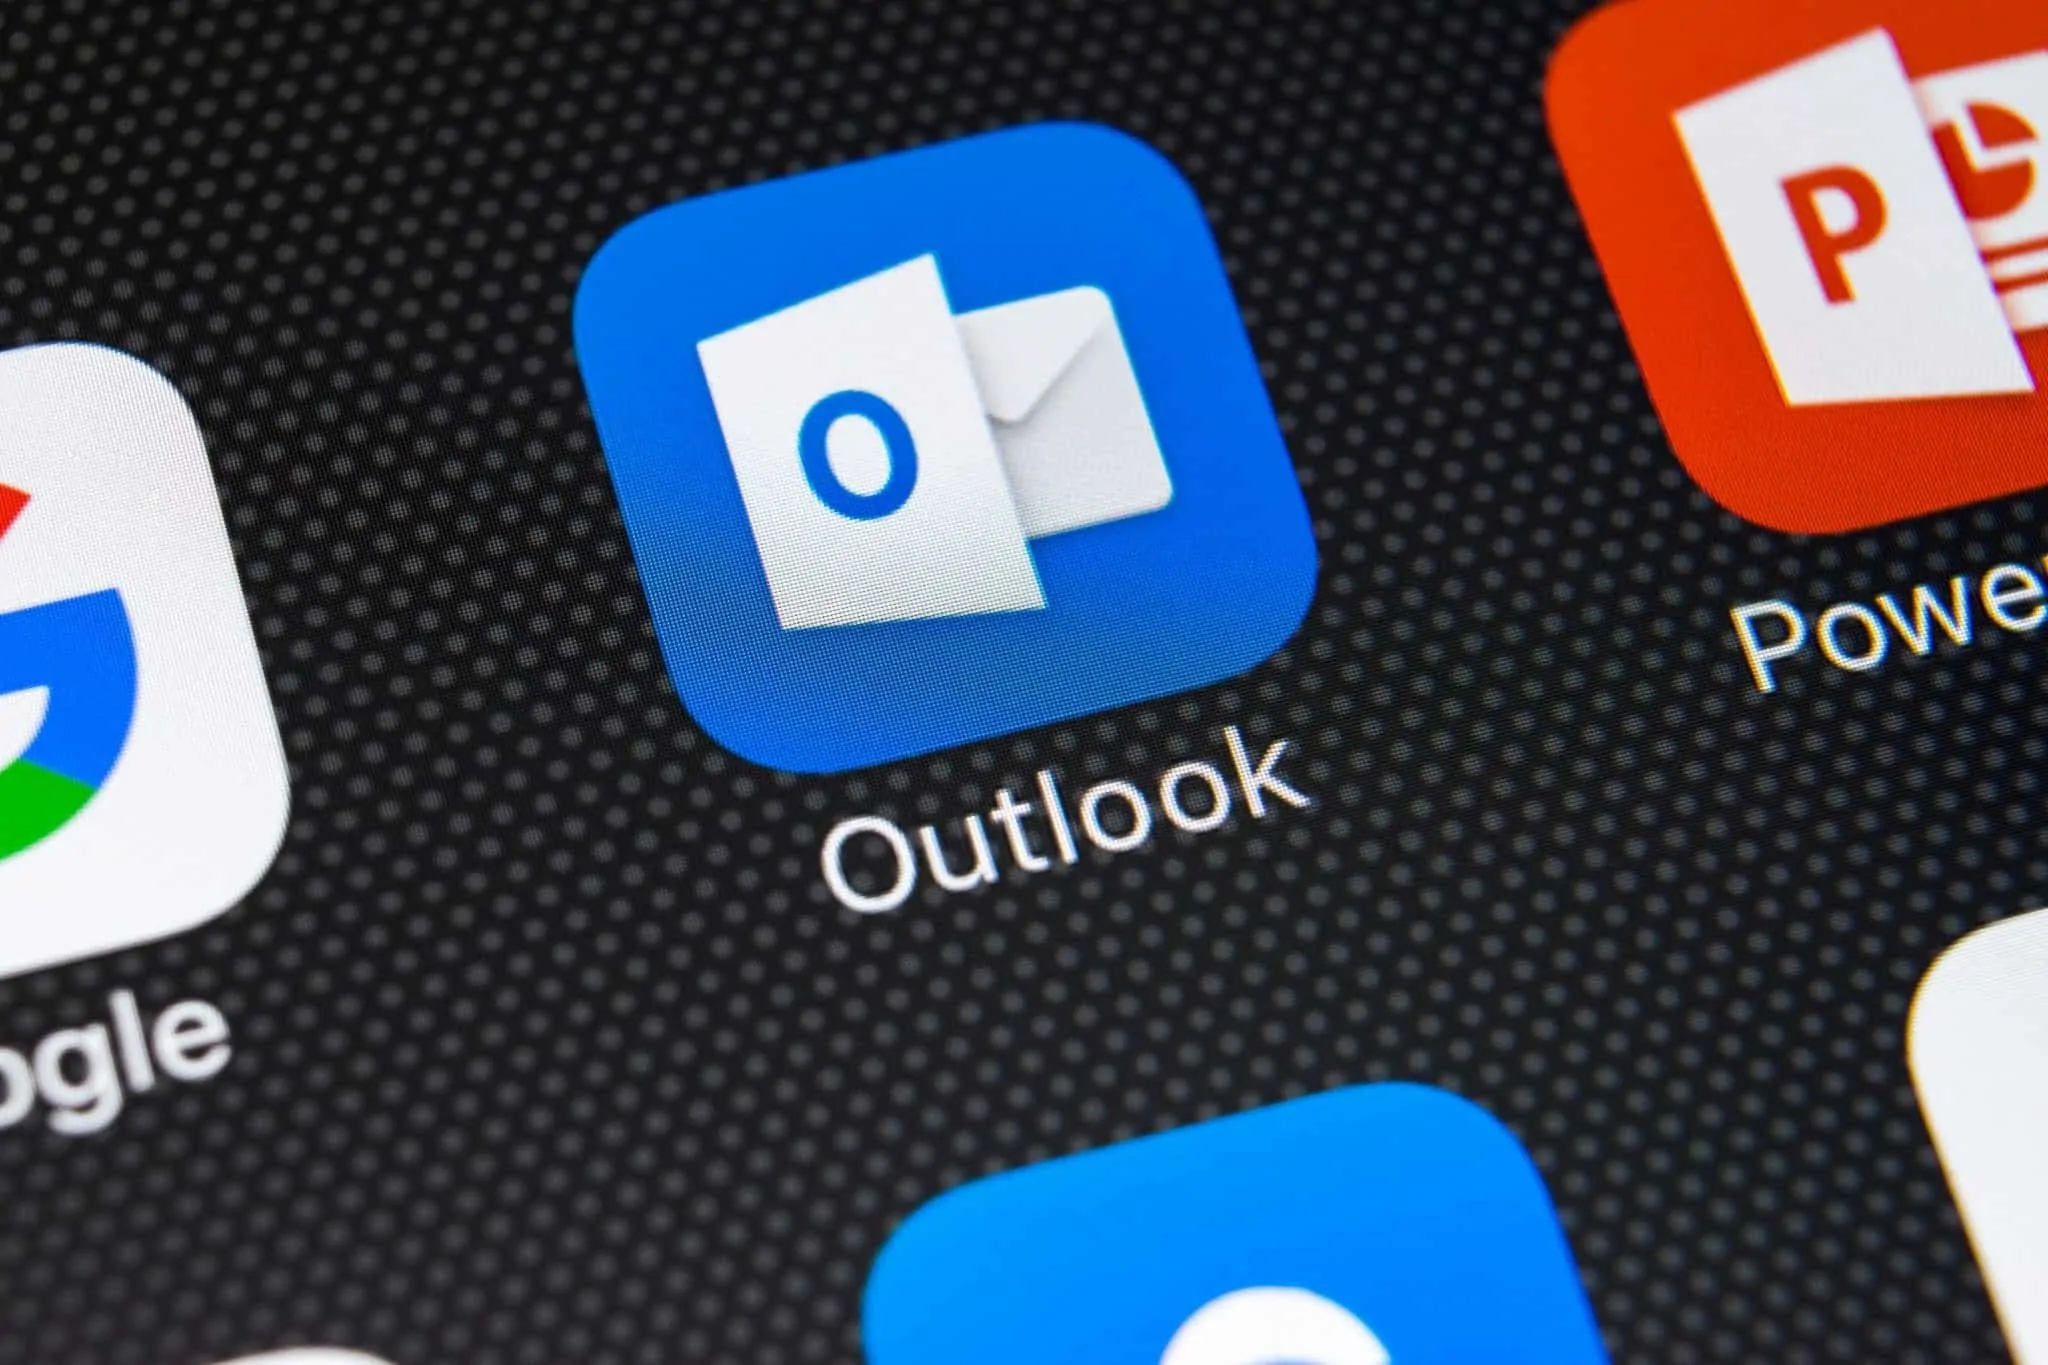 Outlook 365: Subscription, Installation and Set Up